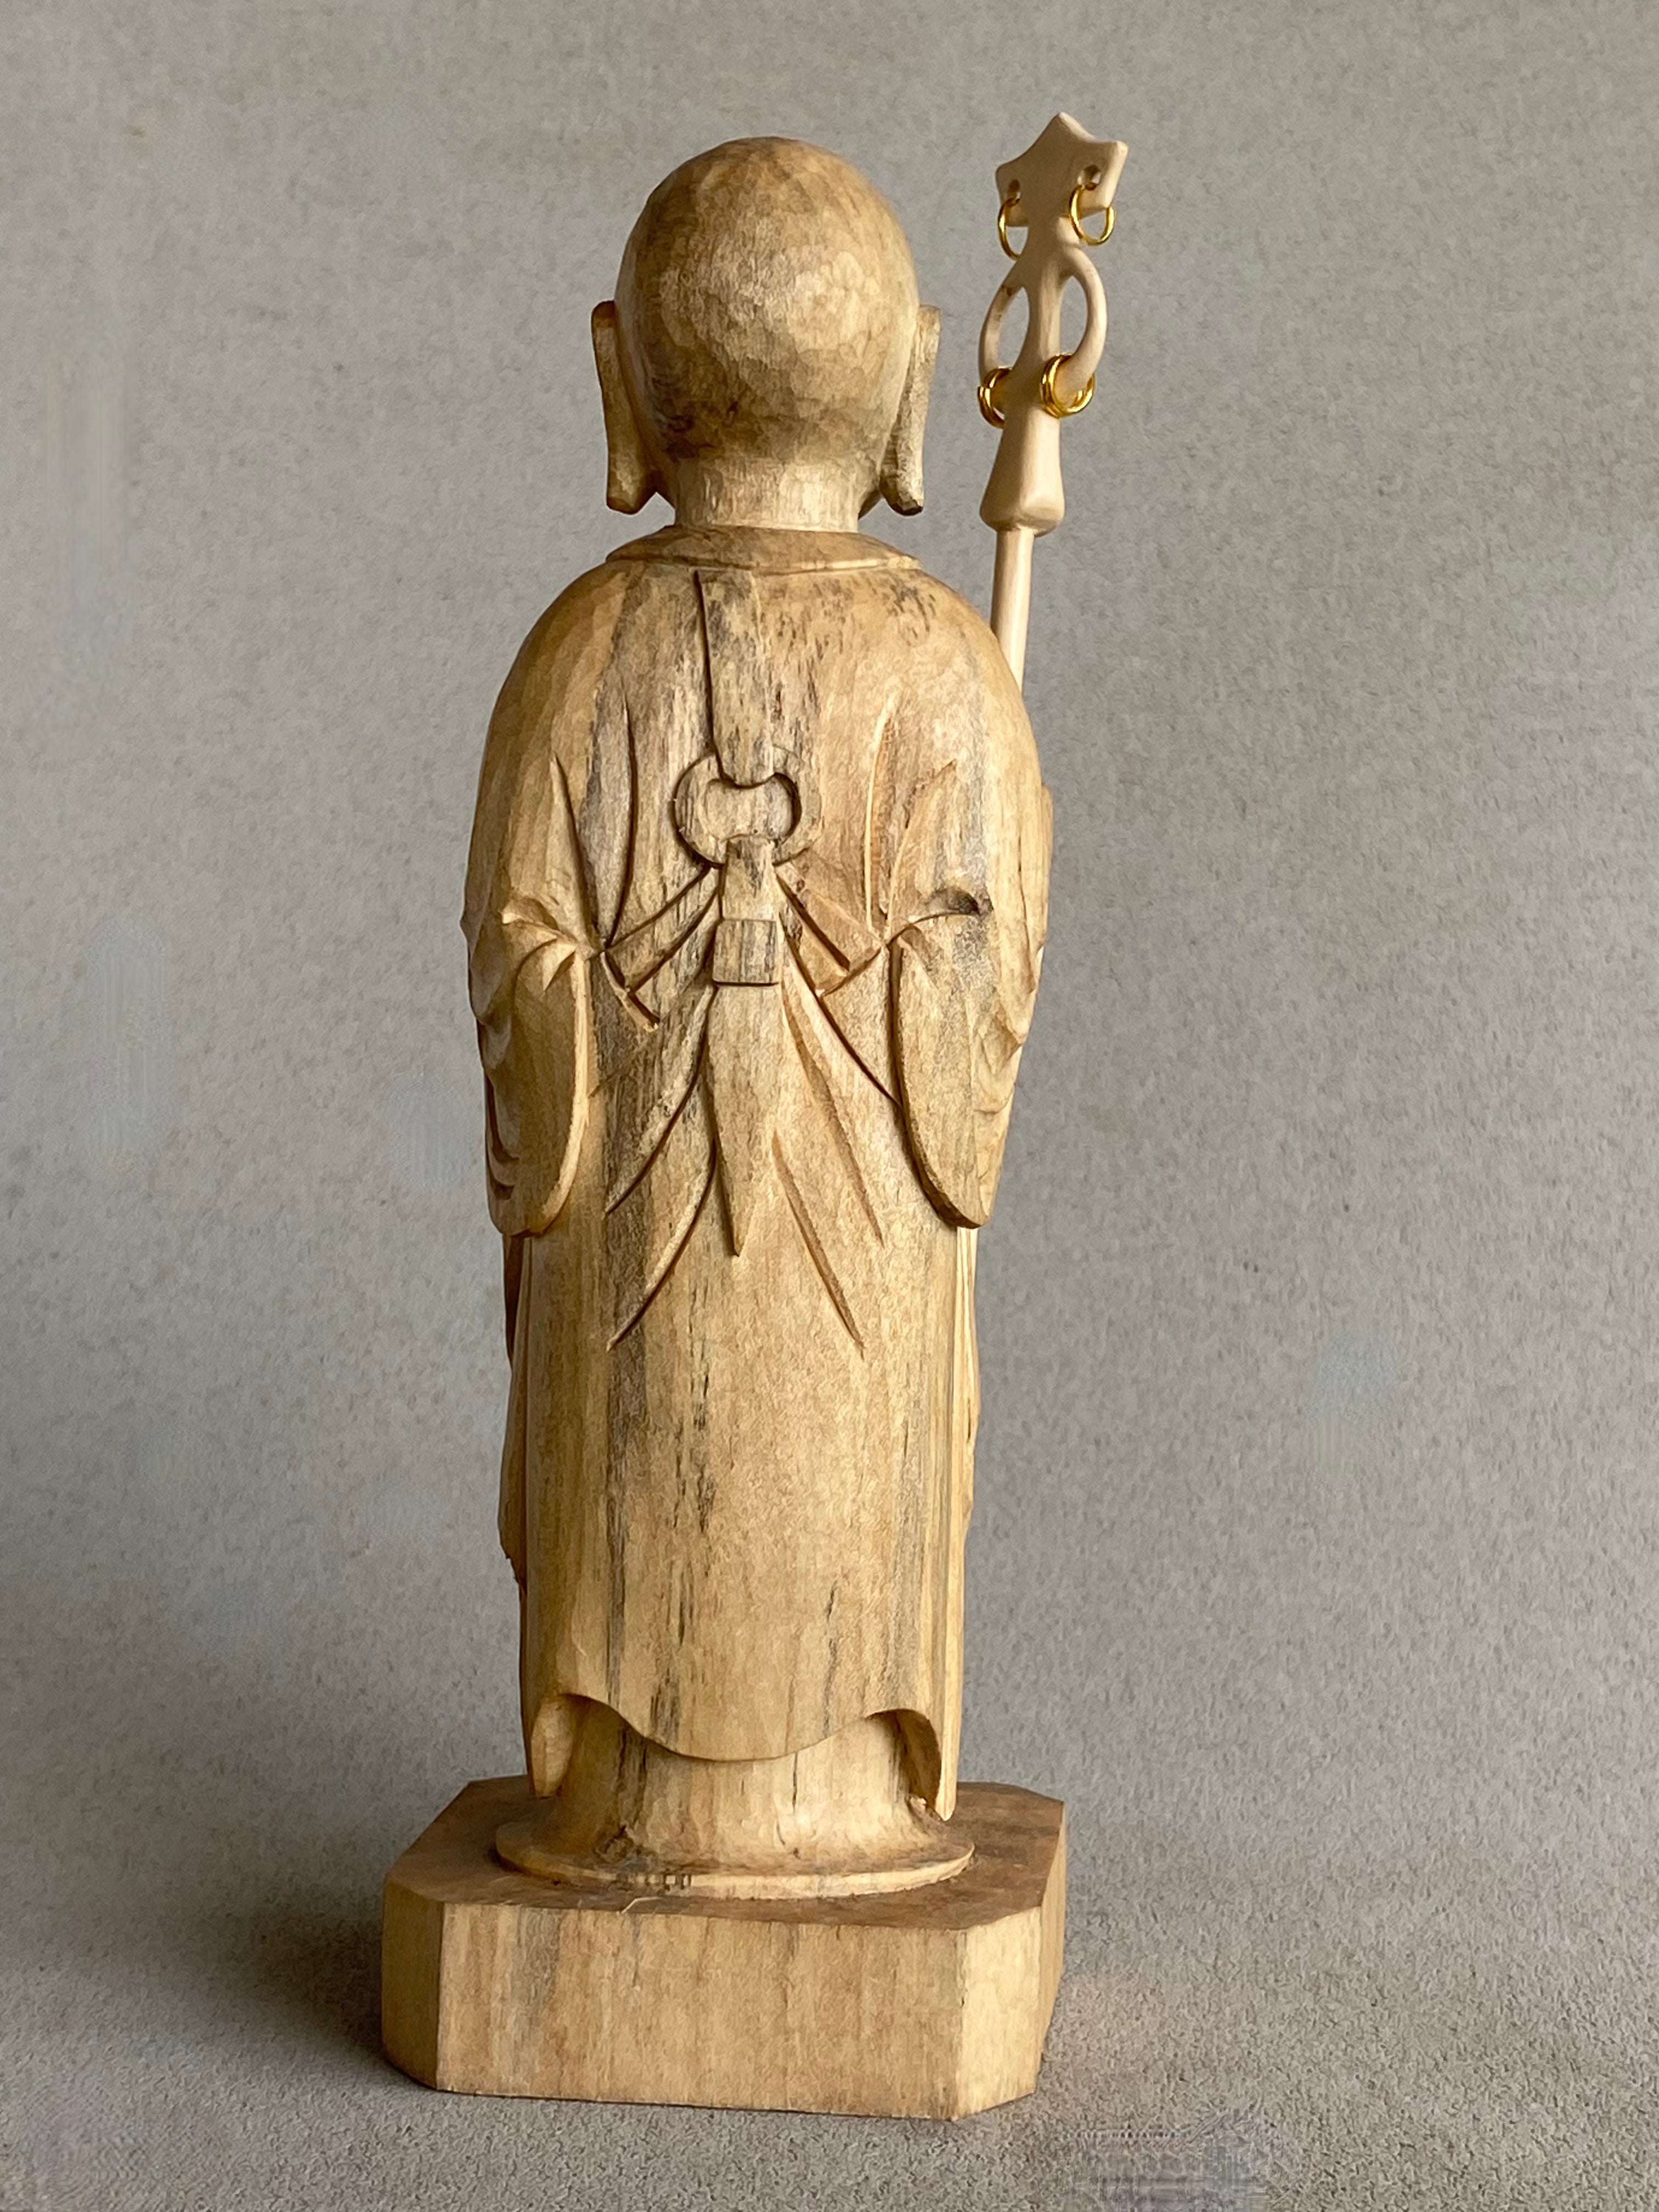 Light colored handcarved wood statue of Jizo as a man, holding a staff with 6 gold rings and in his other hand the Wish Fulfilling Gem, back view